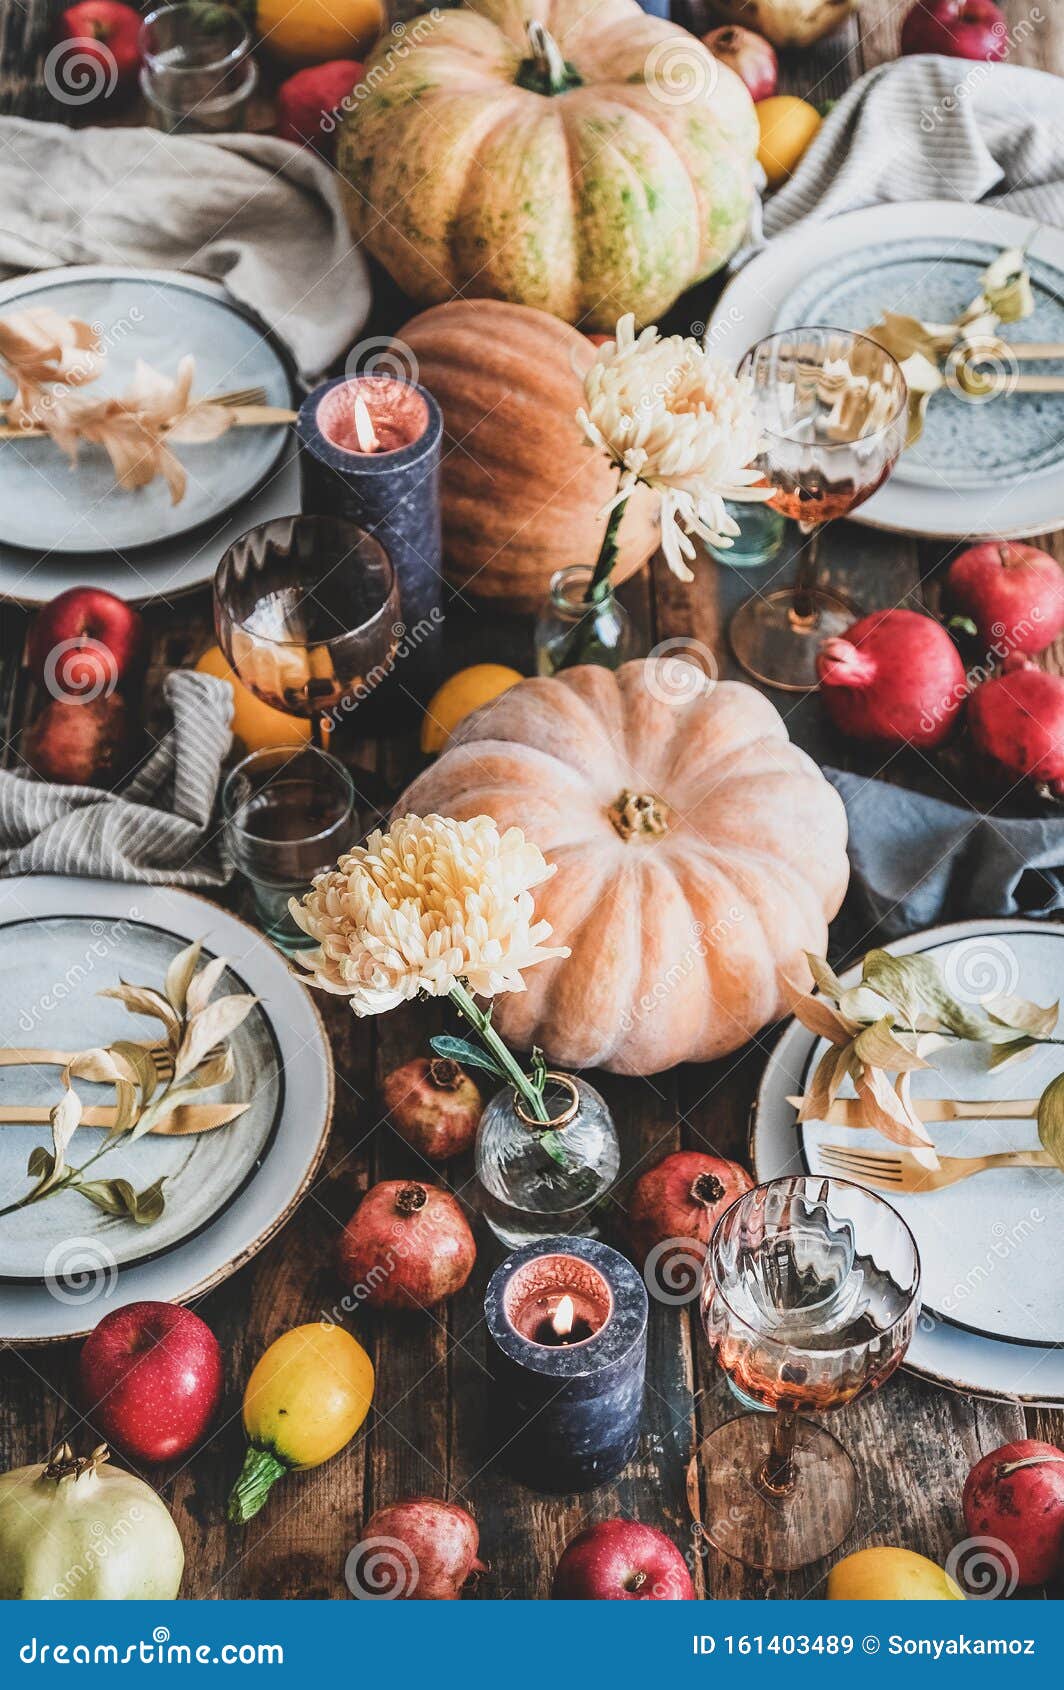 Fall Table Setting for Thanksgiving Day Party Stock Image - Image of ...